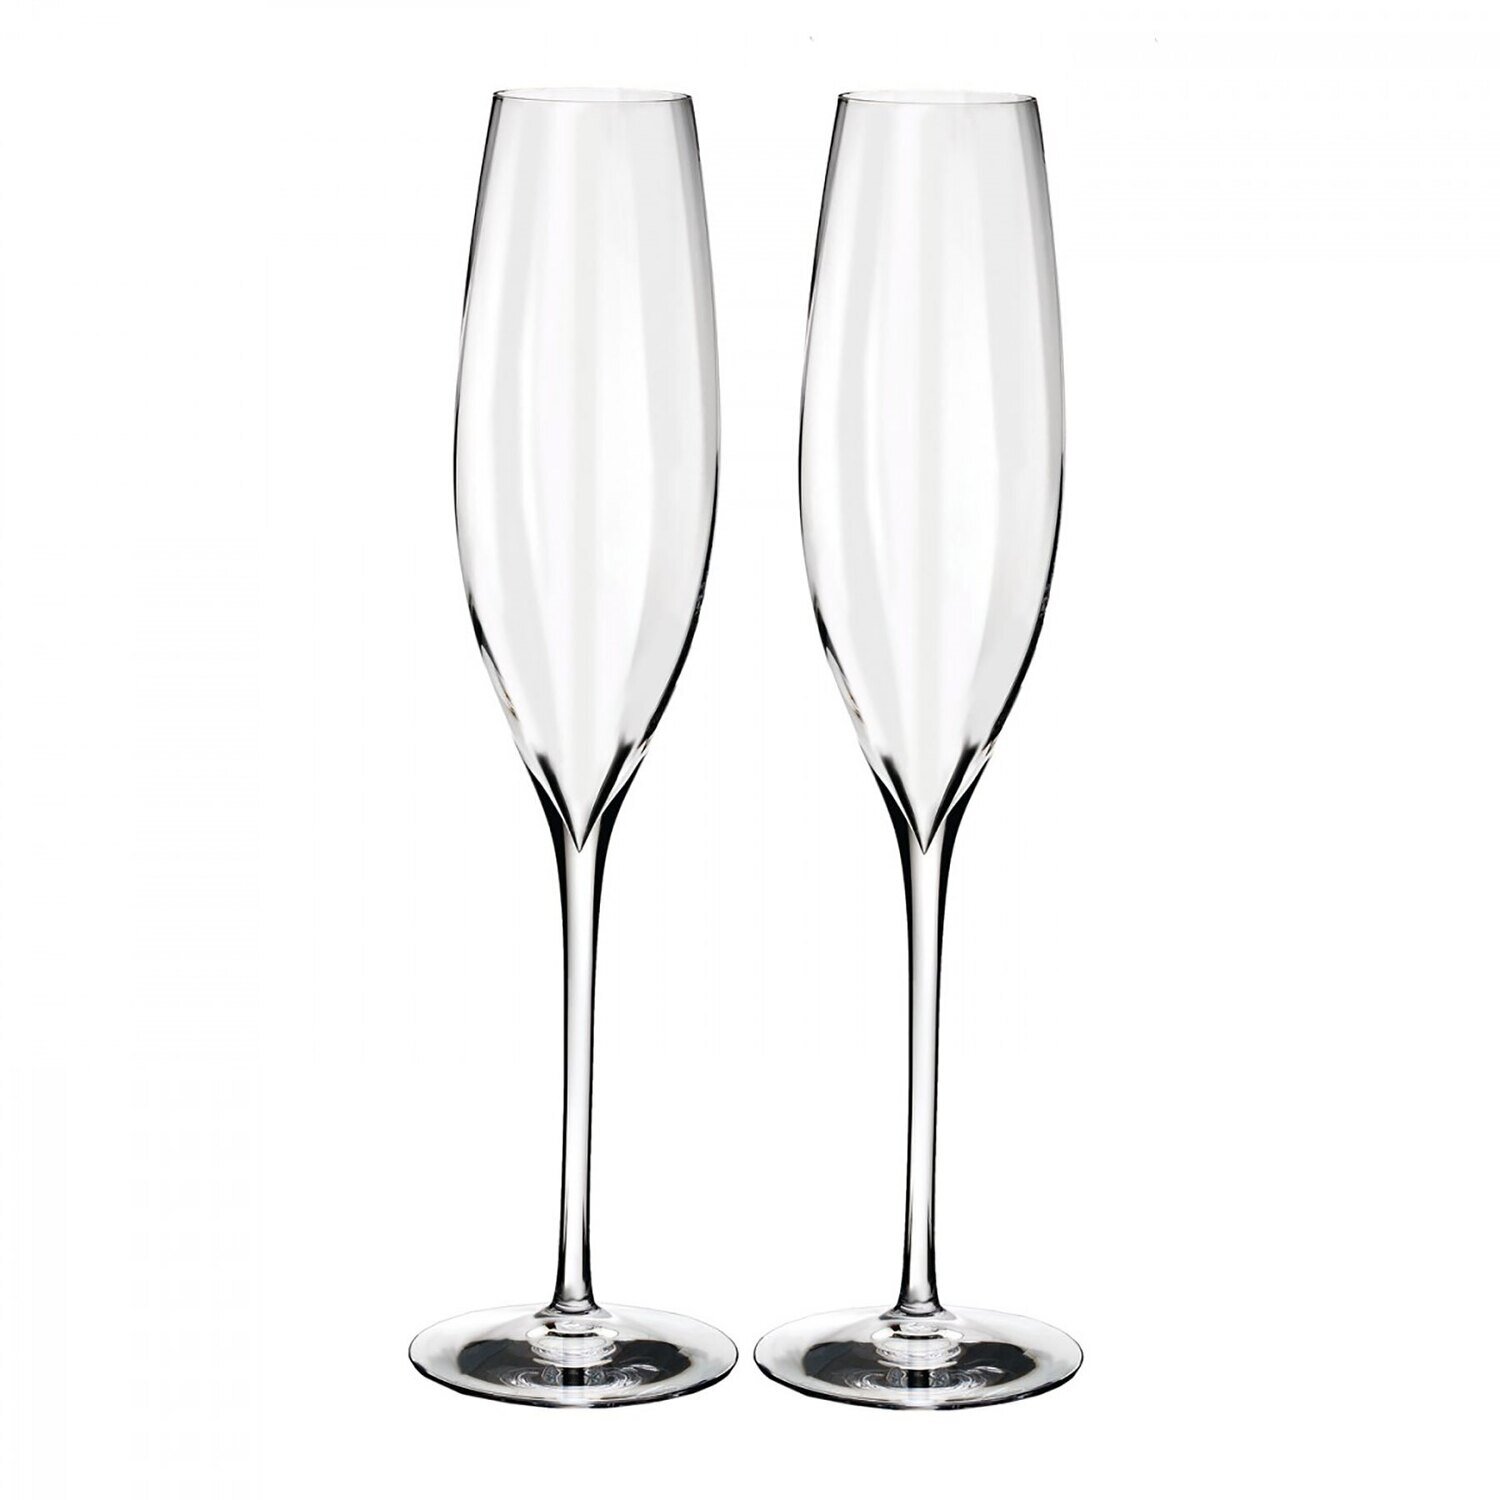 Waterford Elegance Optic Classic Champagne Flute 10.1 Oz Set of 2 40027218